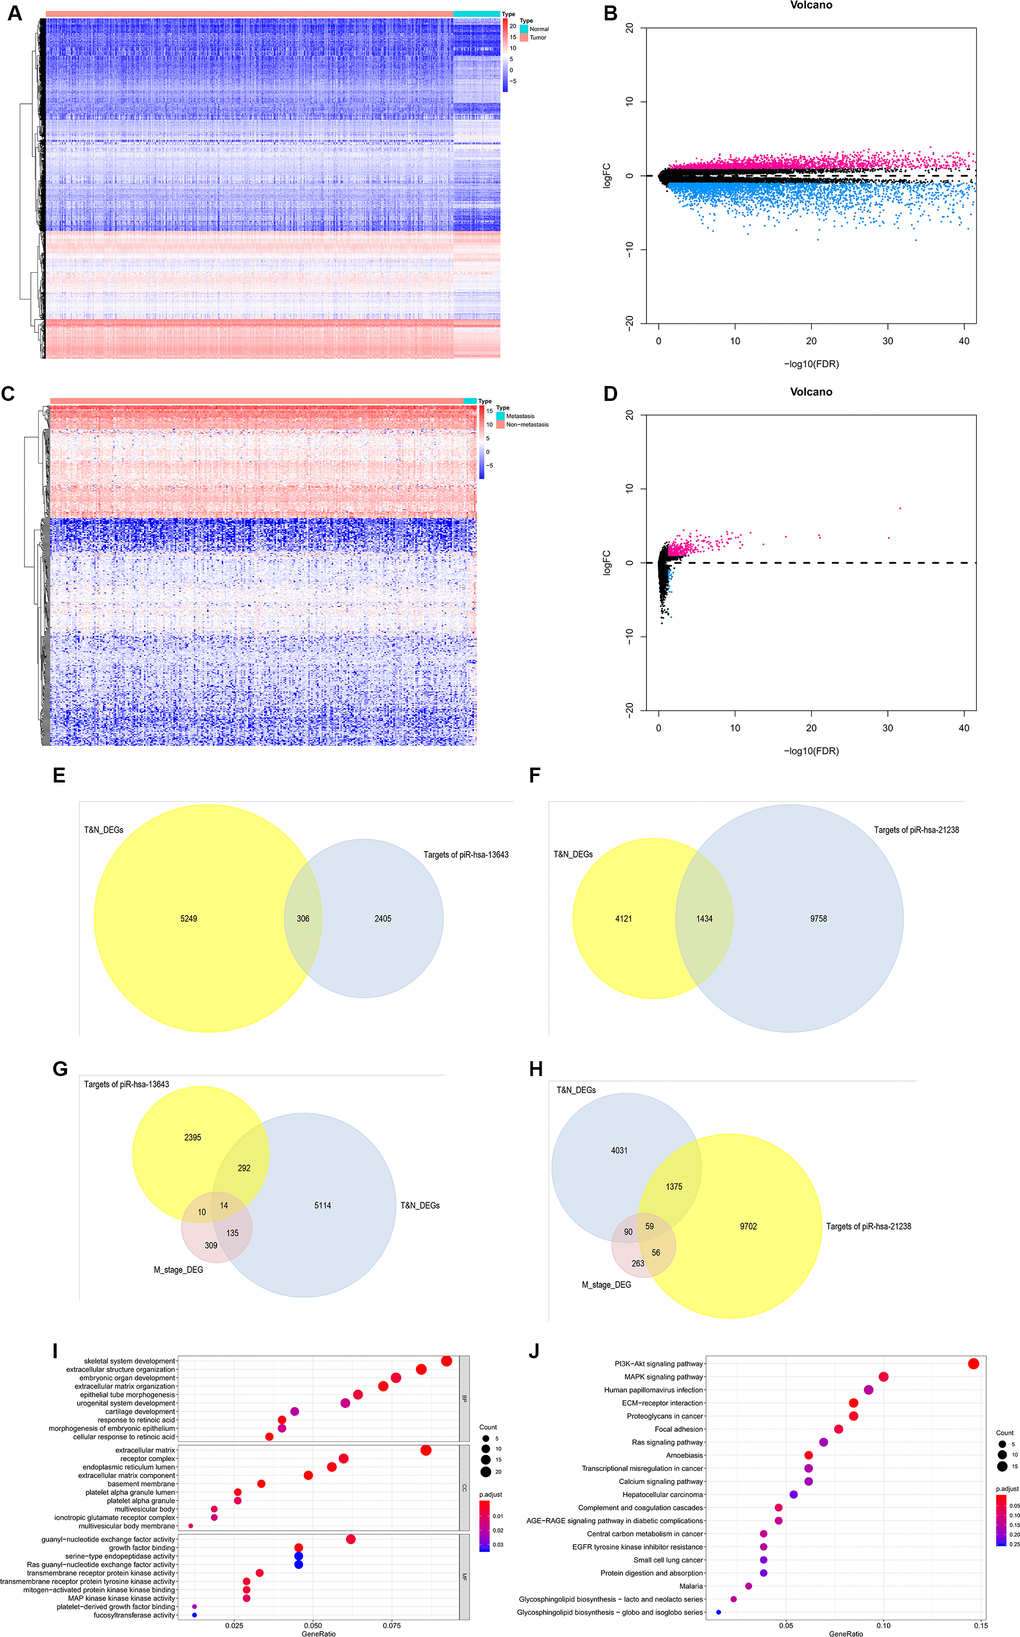 Validation of target genes of piRNA-13643 and piRNA-21238. (A) Result of hierarchical clustering for differential genes in thyroid cancer and noncancerous tissue was calculated by TCGA database. (B) Result of volcano for differential genes in thyroid cancer and noncancerous tissue was calculated by TCGA database. (C) Result of hierarchical clustering for differential genes in thyroid cancer with or without metastasis tissue was calculated by TCGA database. (D) Result of volcano for differential genes in thyroid cancer with or without metastasis tissue was calculated by TCGA database. (E) piRNA-13643 target genes prediction using differential genes in thyroid cancer and noncancerous tissue in TCGA database. (F) piRNA-21238 target genes prediction using differential genes in thyroid cancer and noncancerous tissue in TCGA database. (G) piRNA-13643 target prediction using differential genes in thyroid cancer with or without metastasis tissue in TCGA database. (H) piRNA-21238 target prediction using differential genes in thyroid cancer with or without metastasis tissue in TCGA database. (I) Gene Ontology (GO) analysis of piRNA-13643 associated with biological process, molecular function and cellular component. (J) Top twenty signal pathways of piRNA-13643 by KEGG.